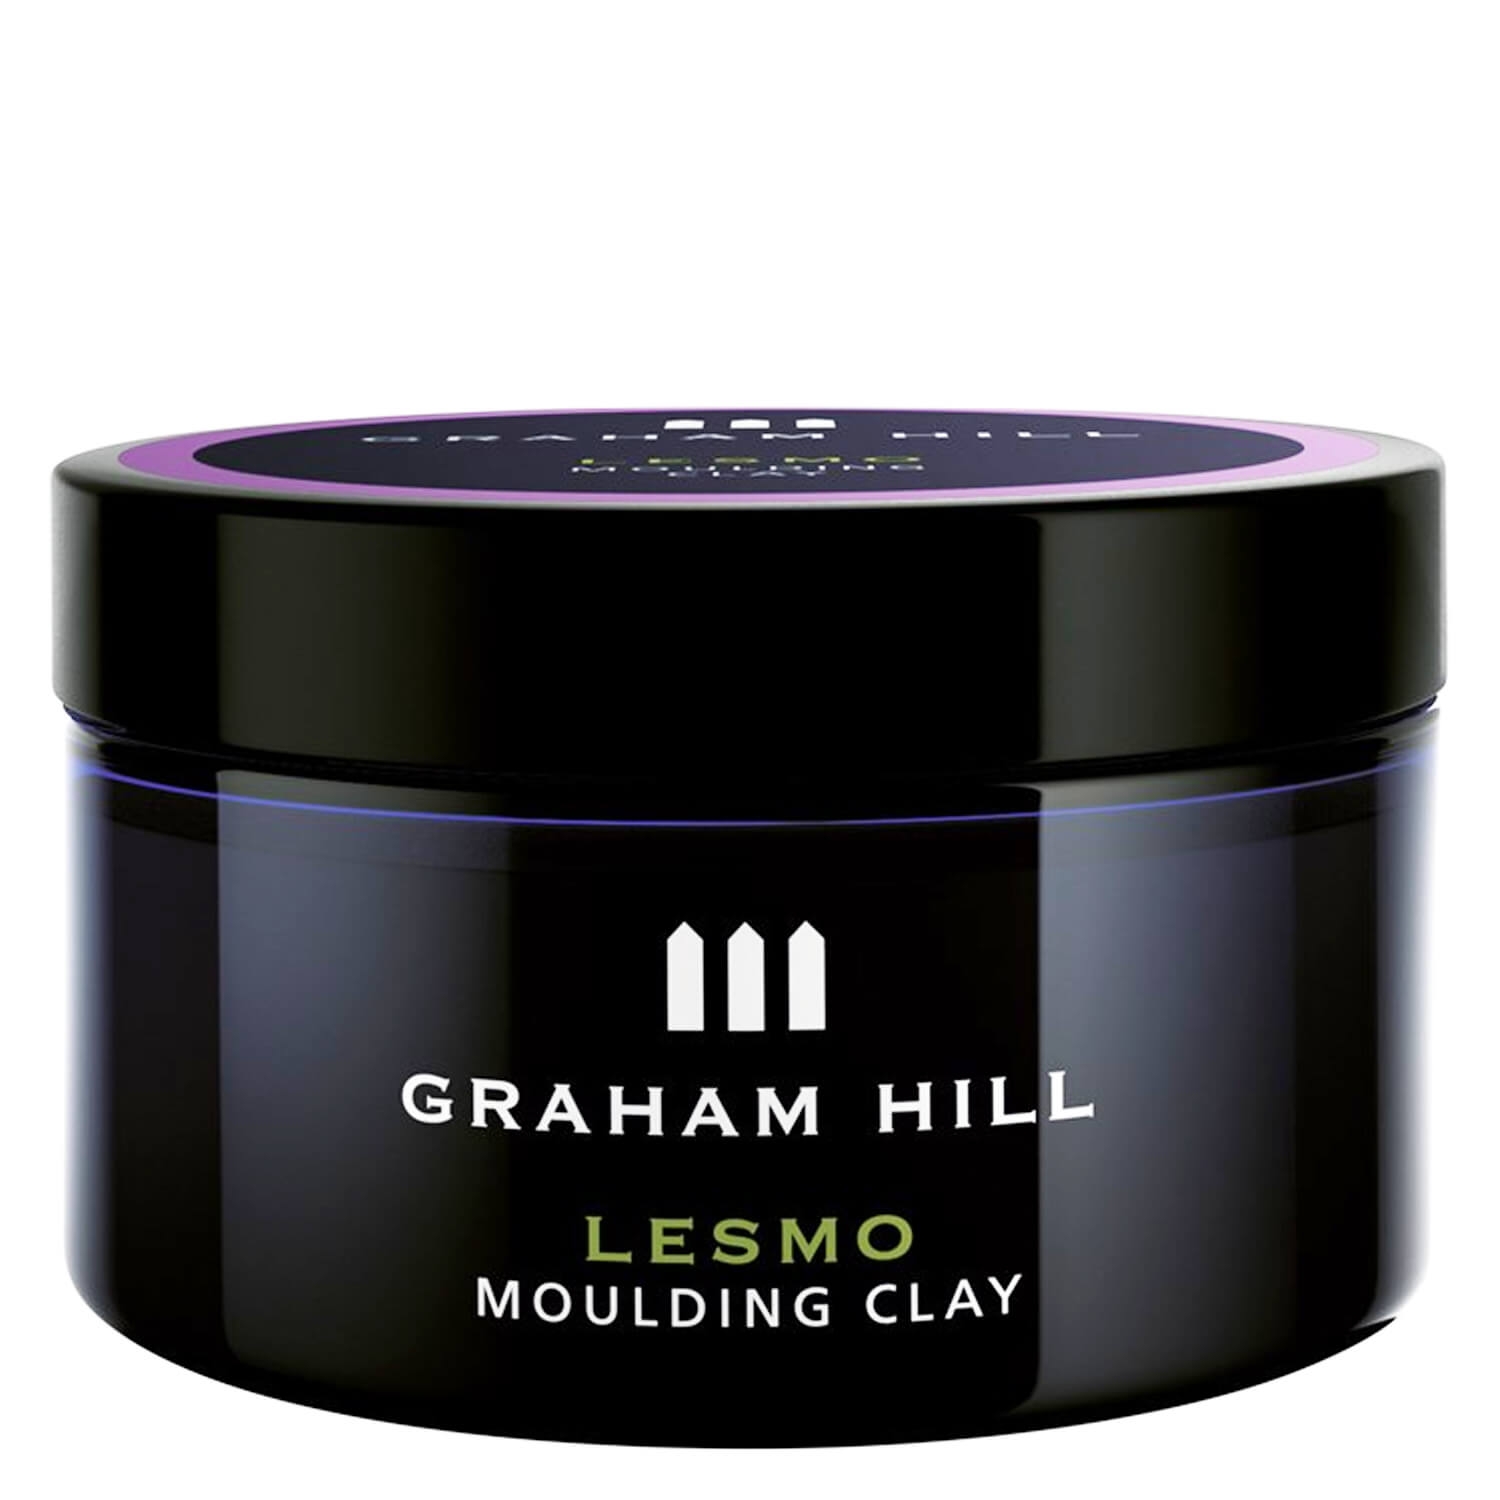 Produktbild von Styling & Grooming - Lesmo Moulding Clay